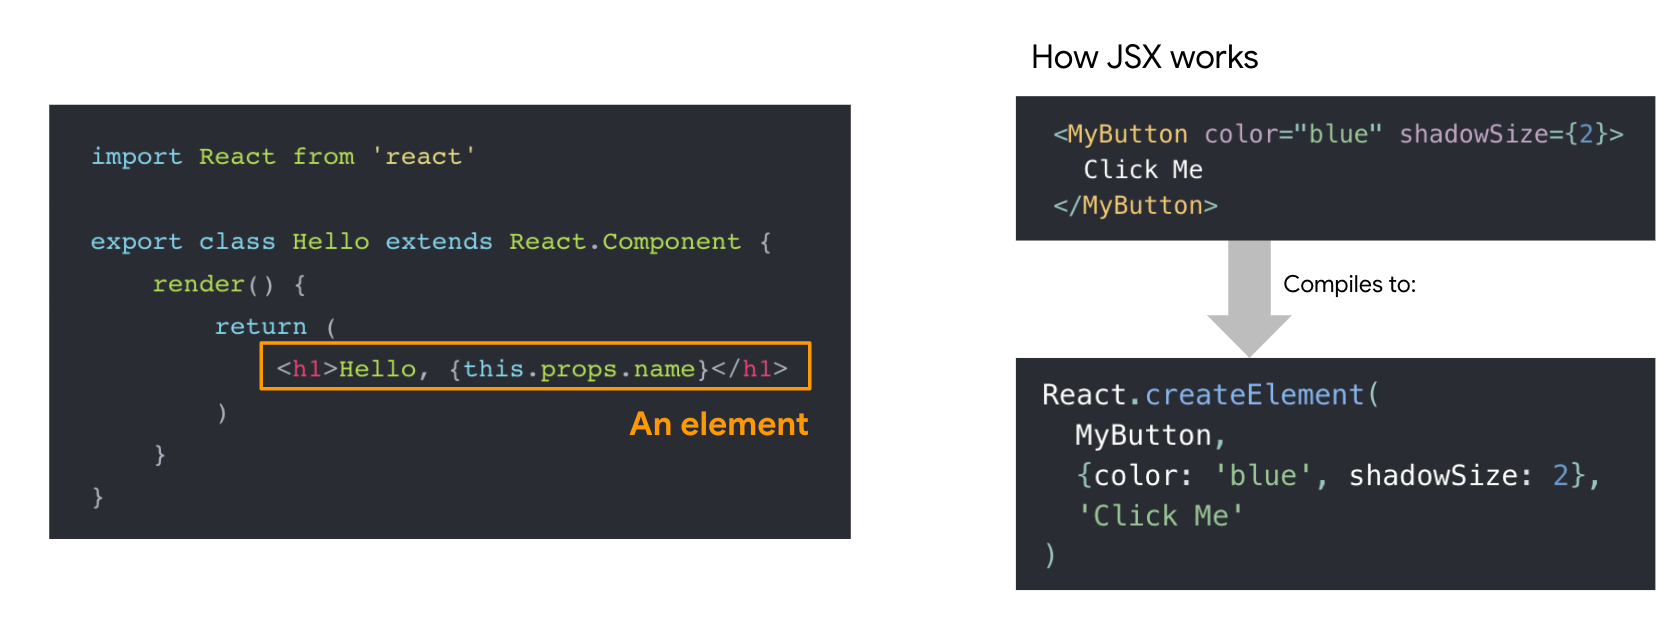 how JSX works